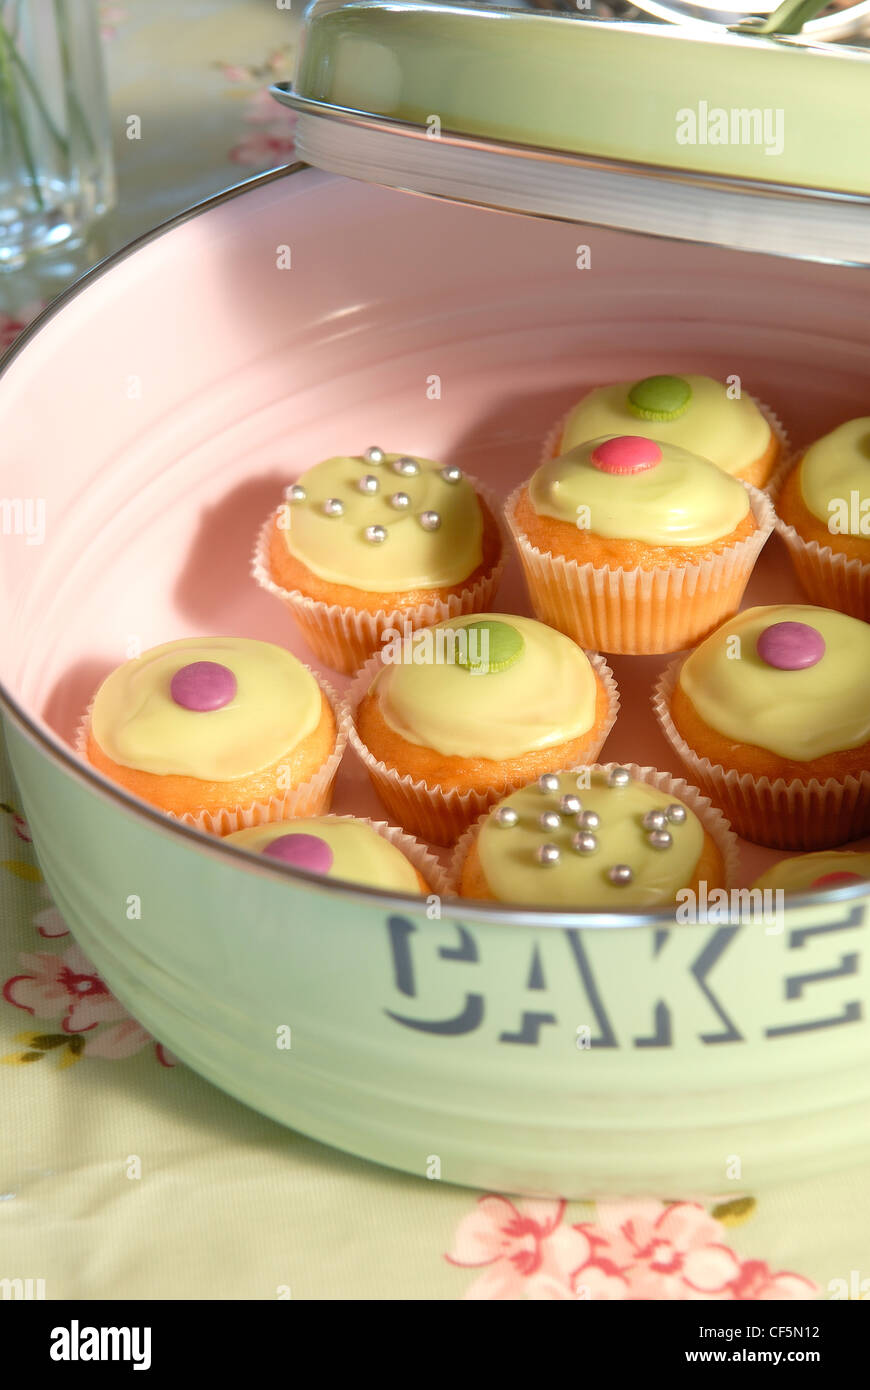 An enamel cake tin filled with various fairycakes, topped with cream coloured icing and various sweets Stock Photo